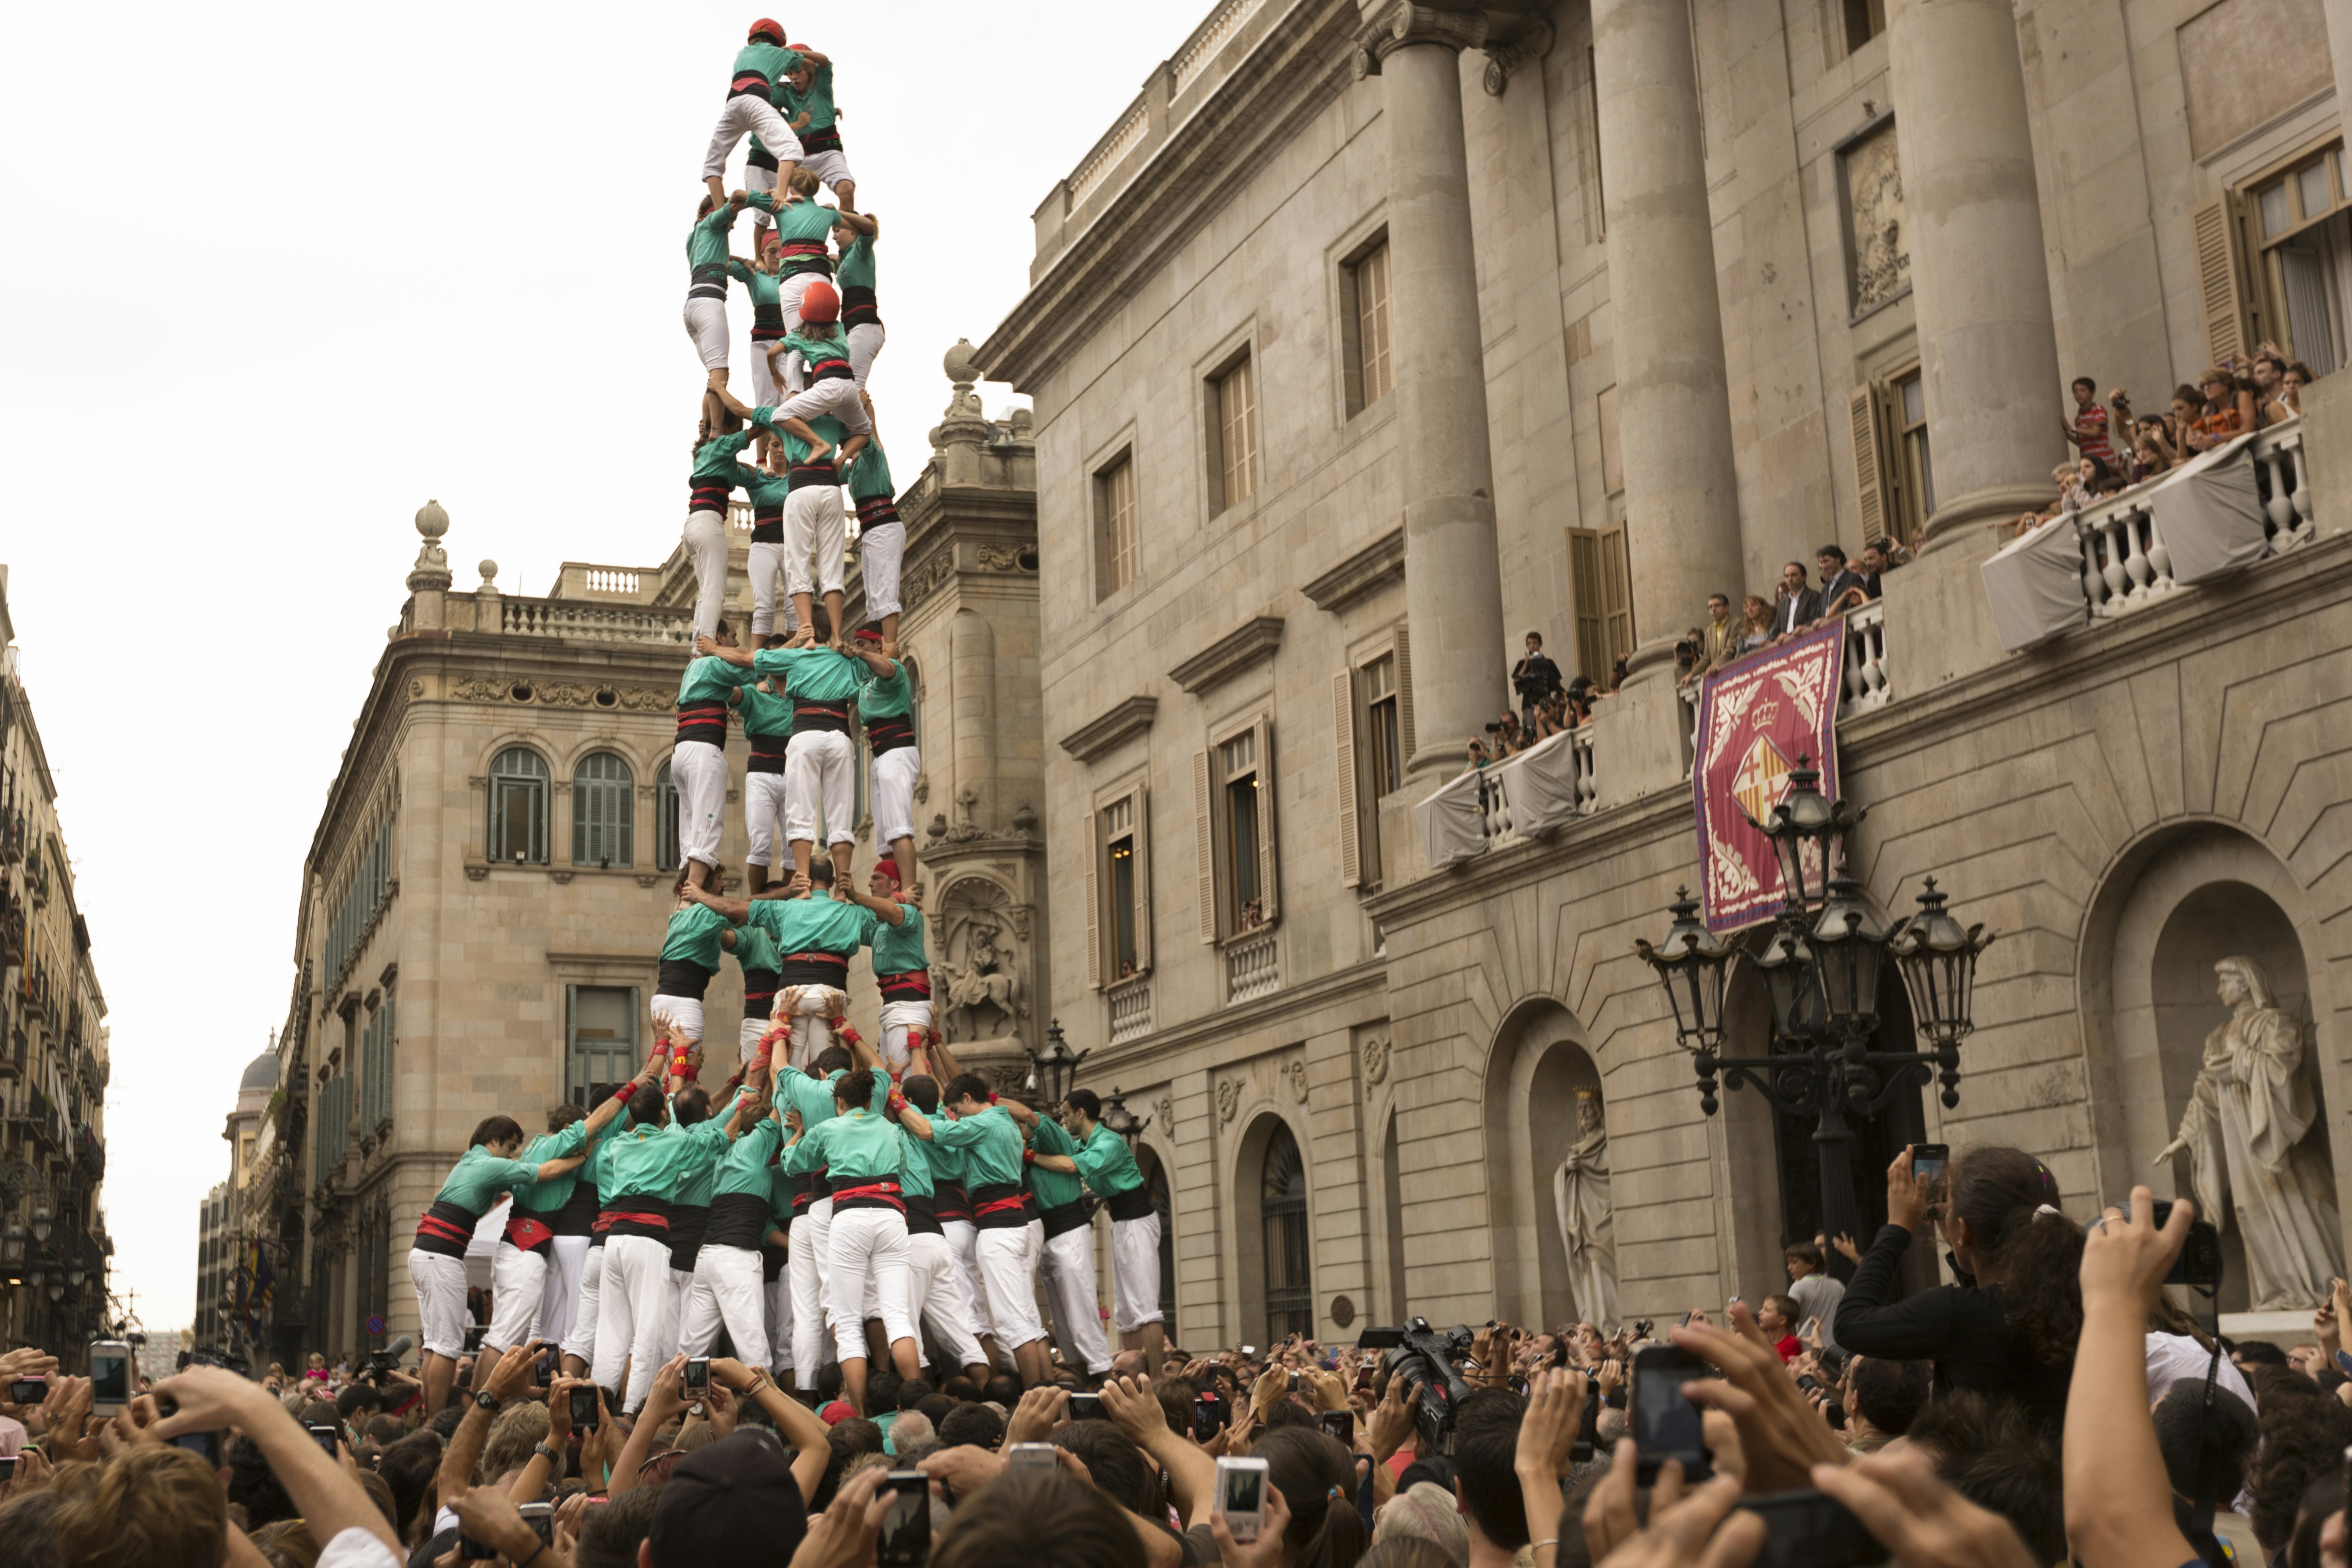 Castellers (human towers) in Barcelona's Plaça Sant Jaume during La Mercè; people wearing white trousers and green shirts are stood on each other's shoulders to form a tall tower in a square packed with people trying to photograph the spectacle.